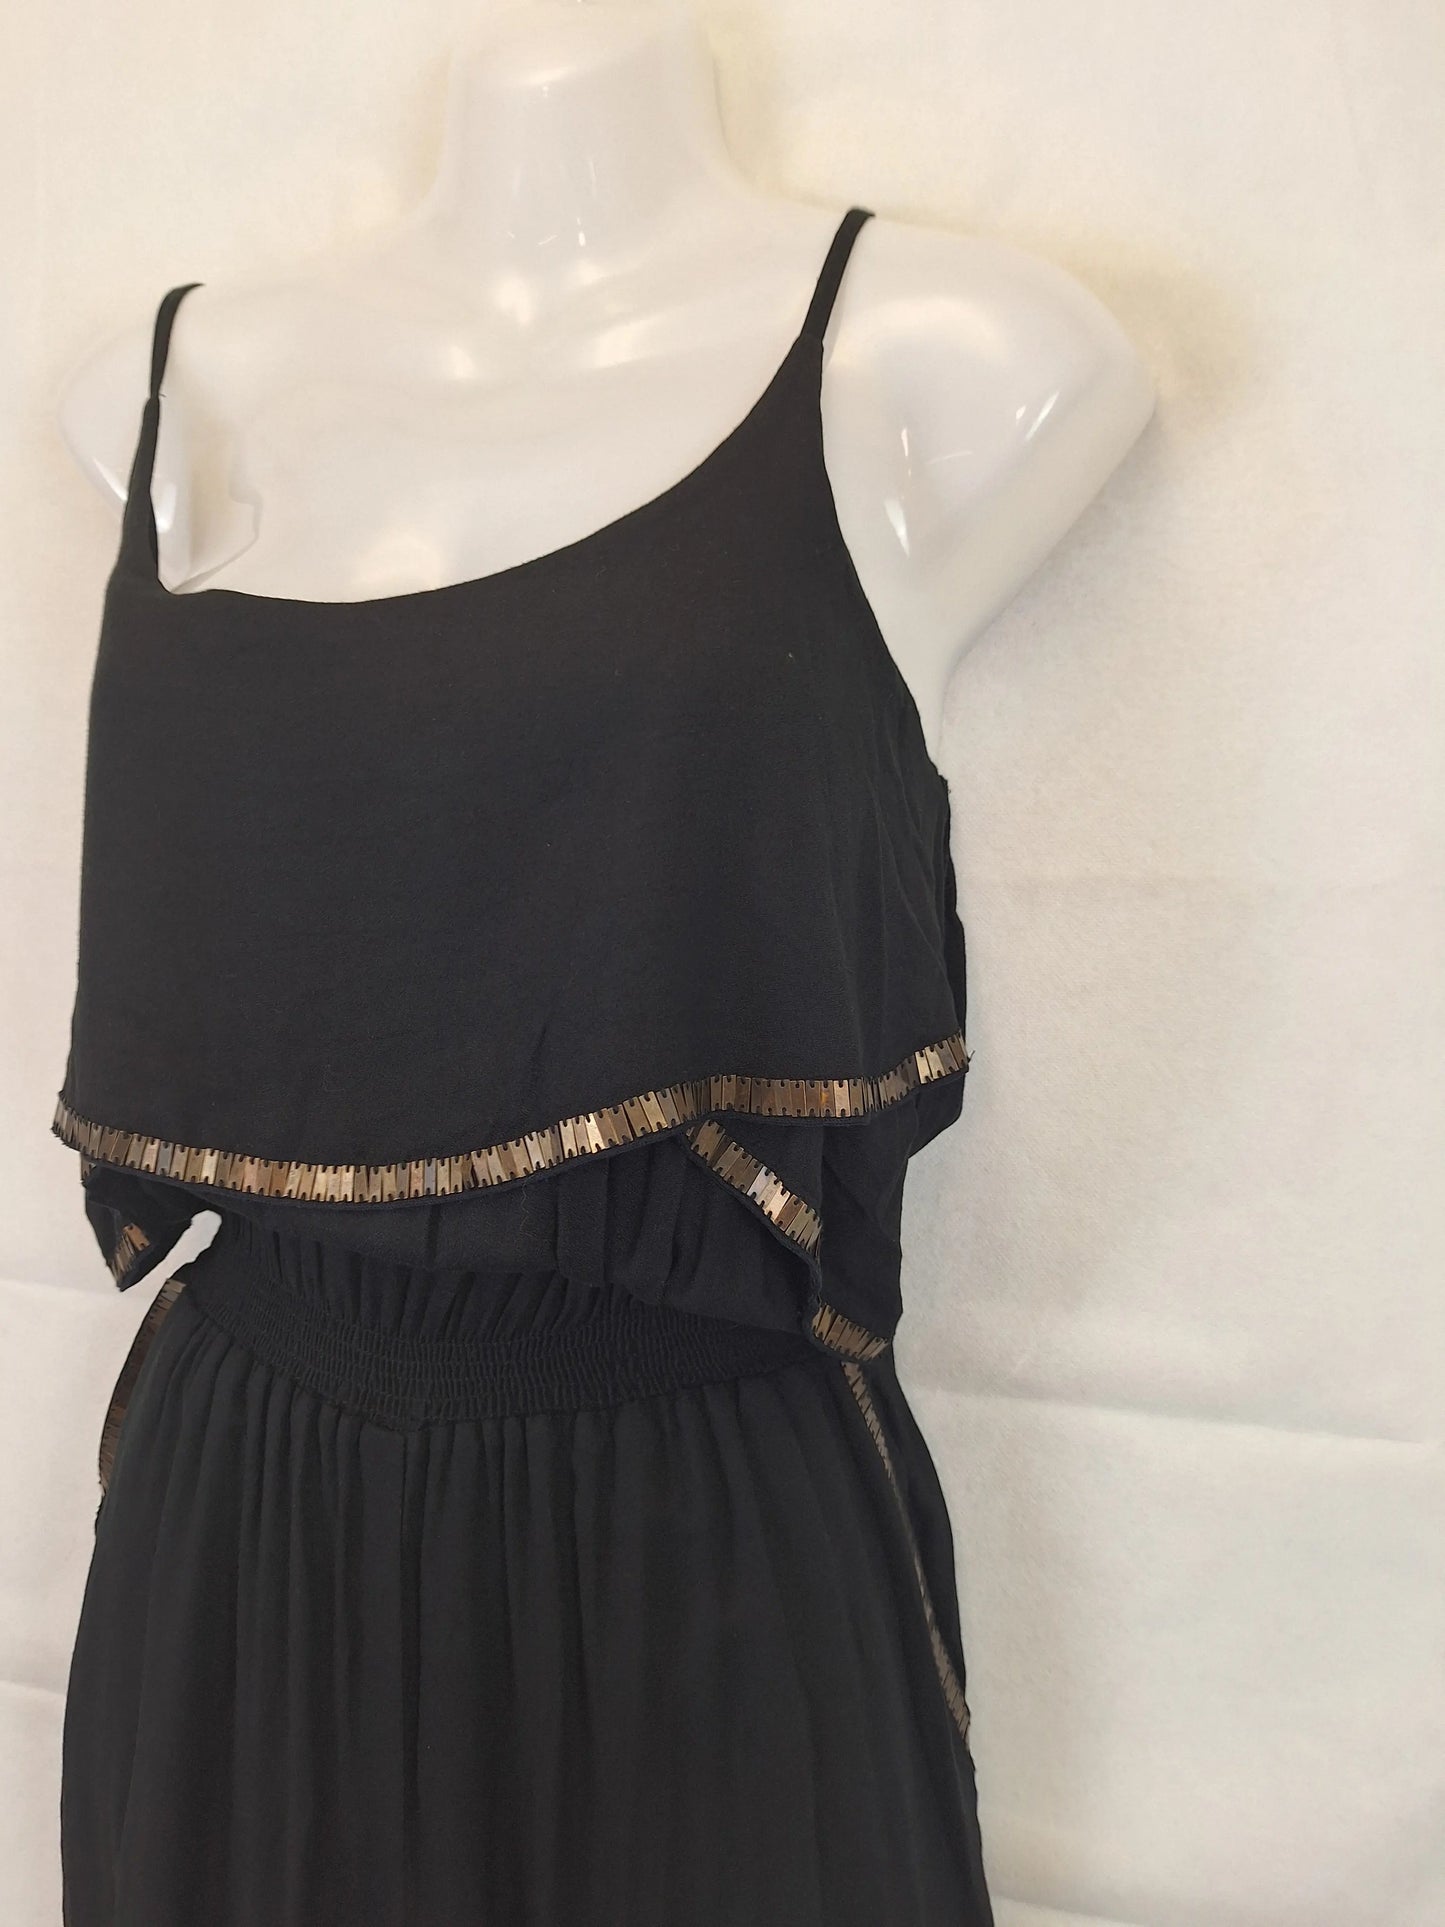 Mr & Mrs Wardrobe Layered Embellished Evening Jumpsuit Size OSFA by SwapUp-Online Second Hand Store-Online Thrift Store